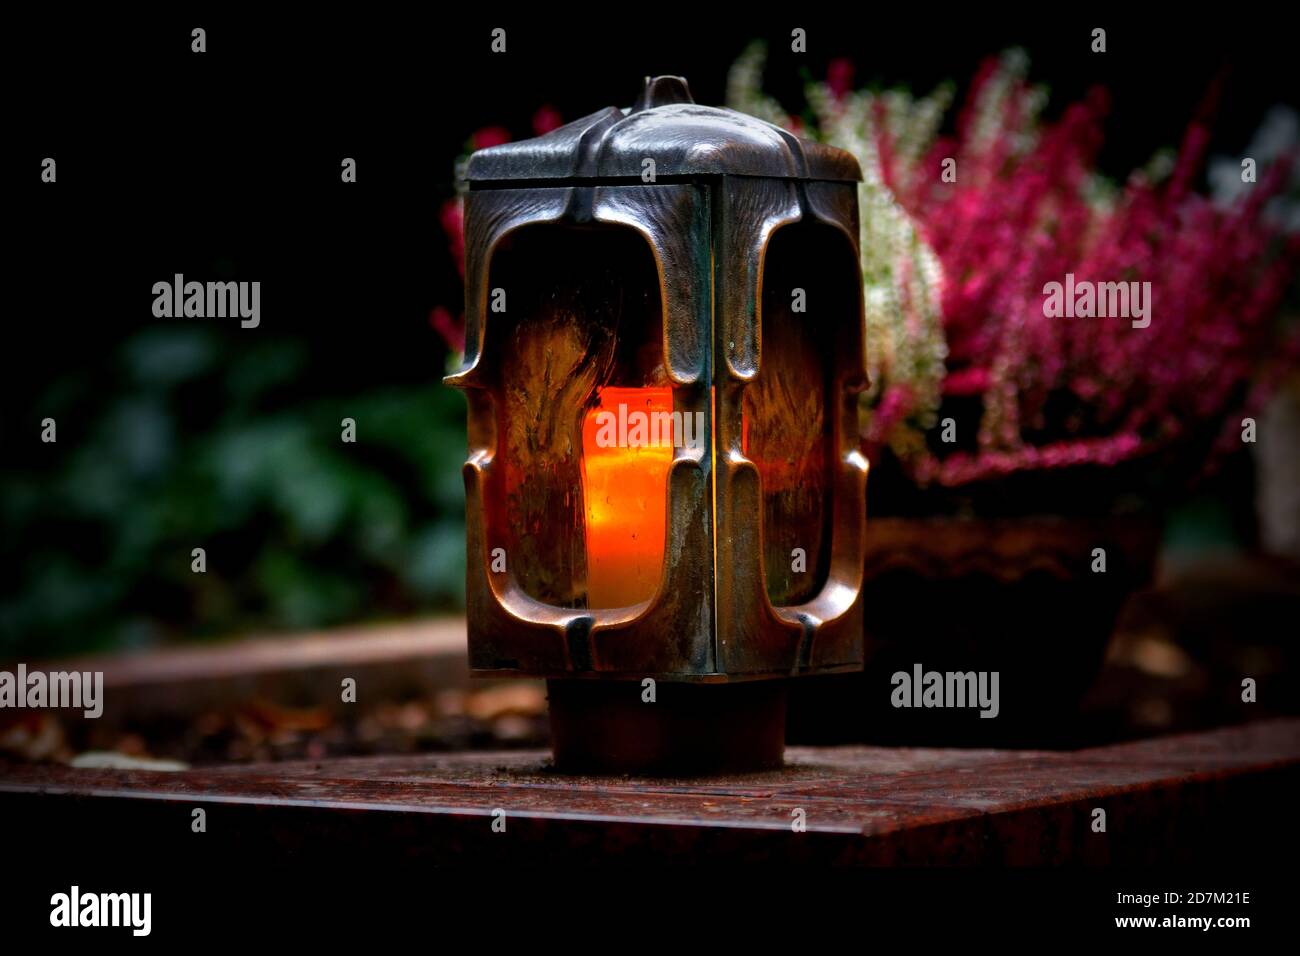 Grave lantern made of metal with burning candle Stock Photo